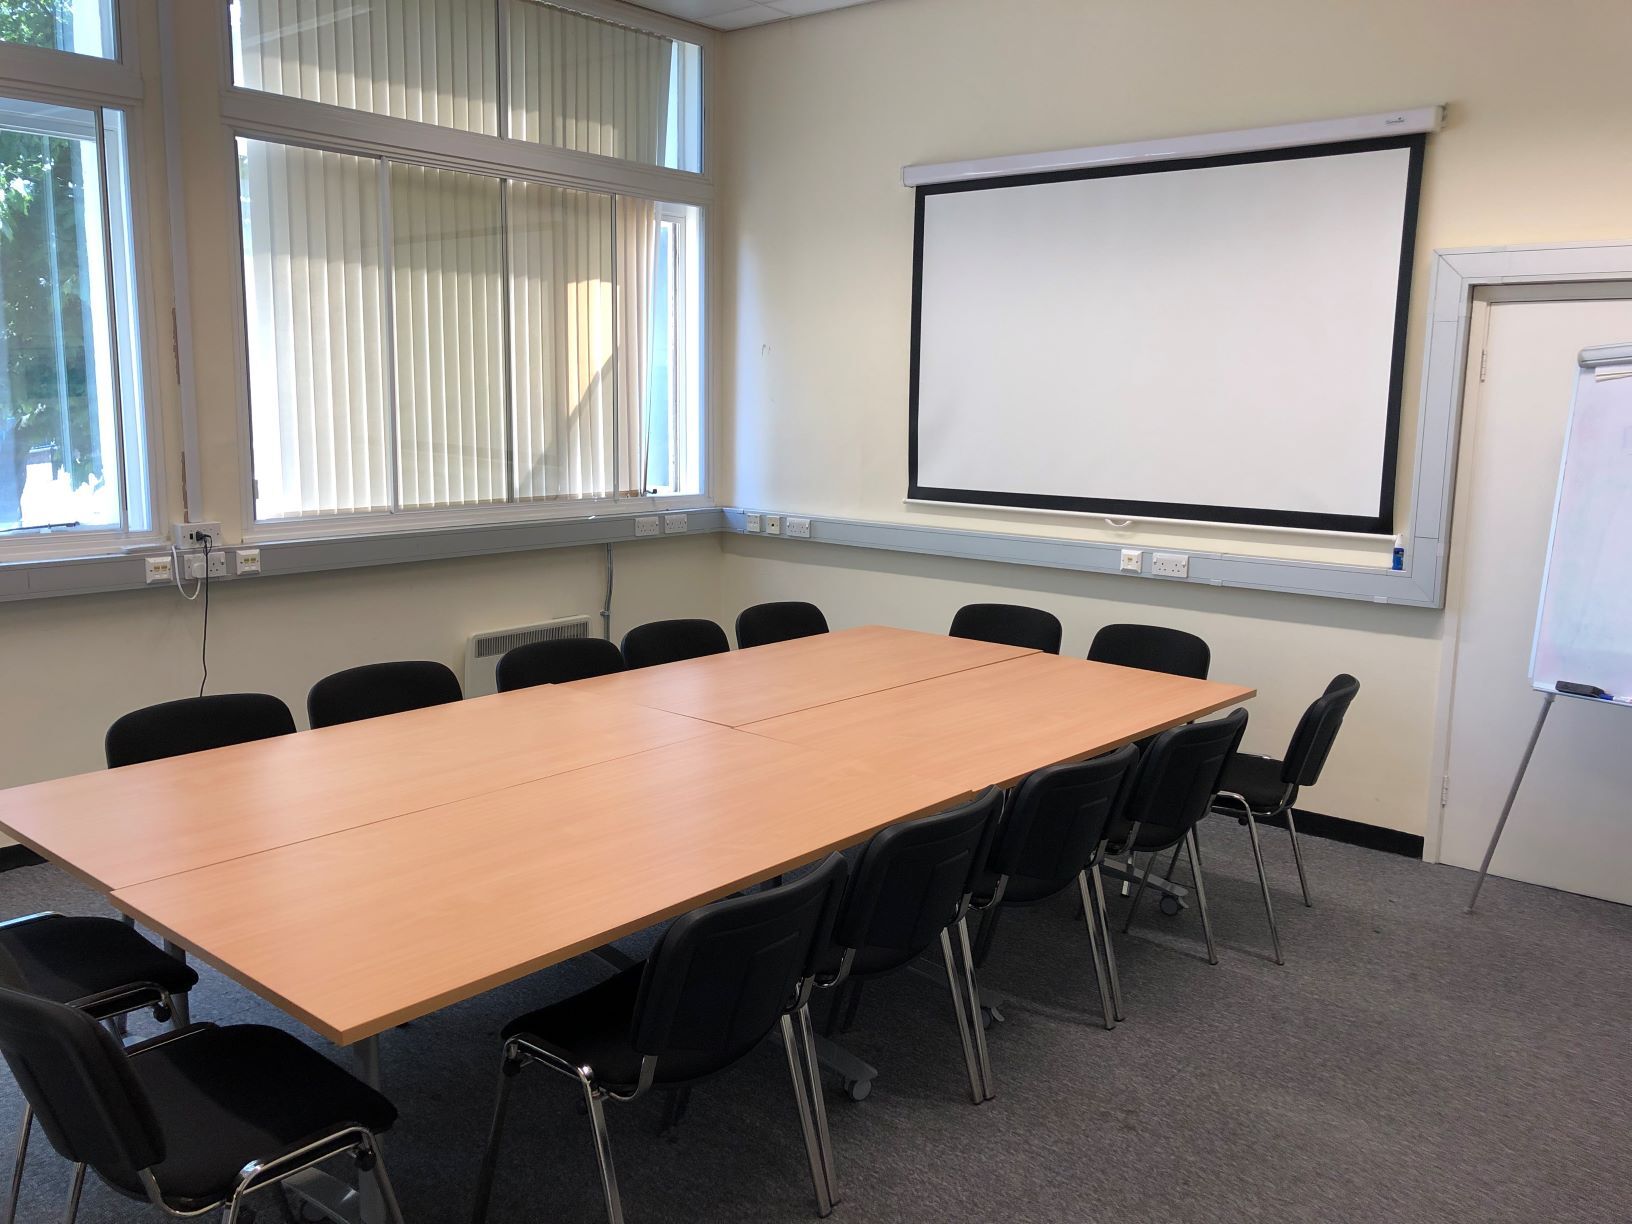 Photograph showing the standard layout of the Biomedical Campus Seminar Room - a room with twelve chairs around a large boardroom table, with a projector screen on the end wall.